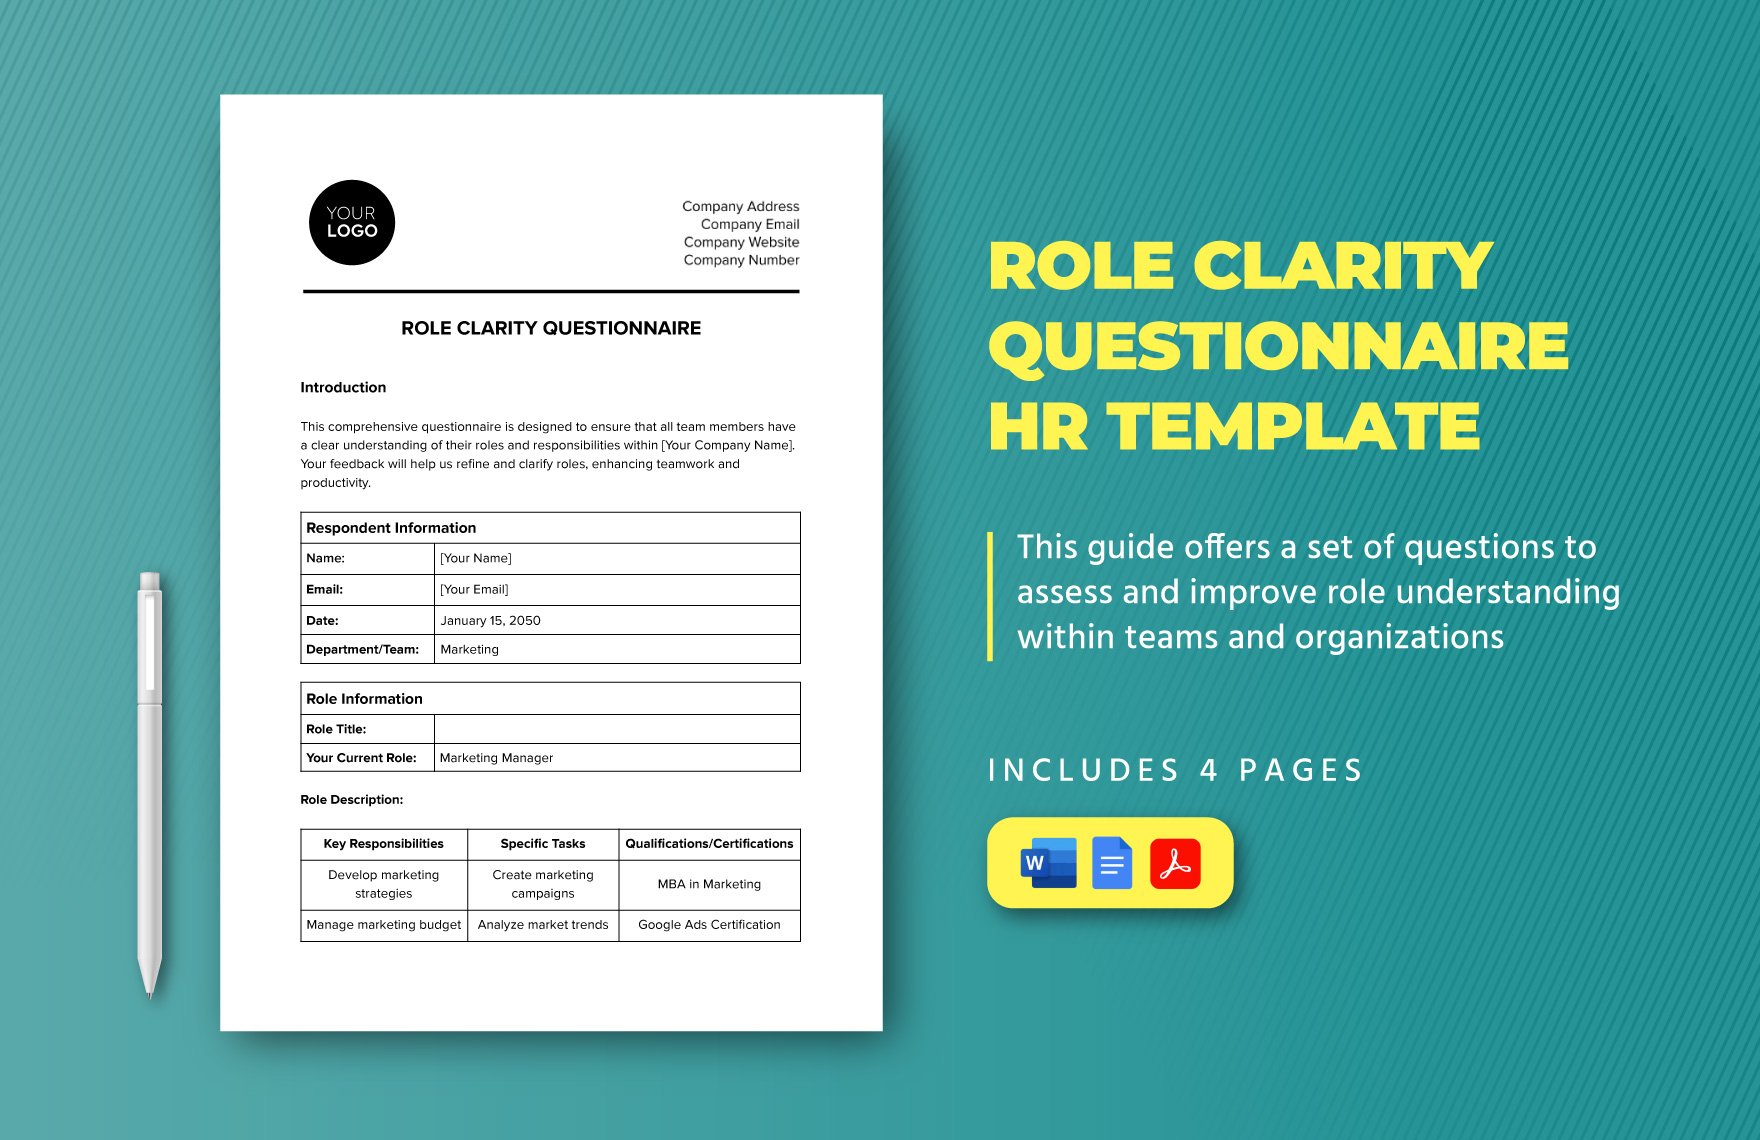 Role Clarity Questionnaire HR Template in Word, Google Docs, PDF